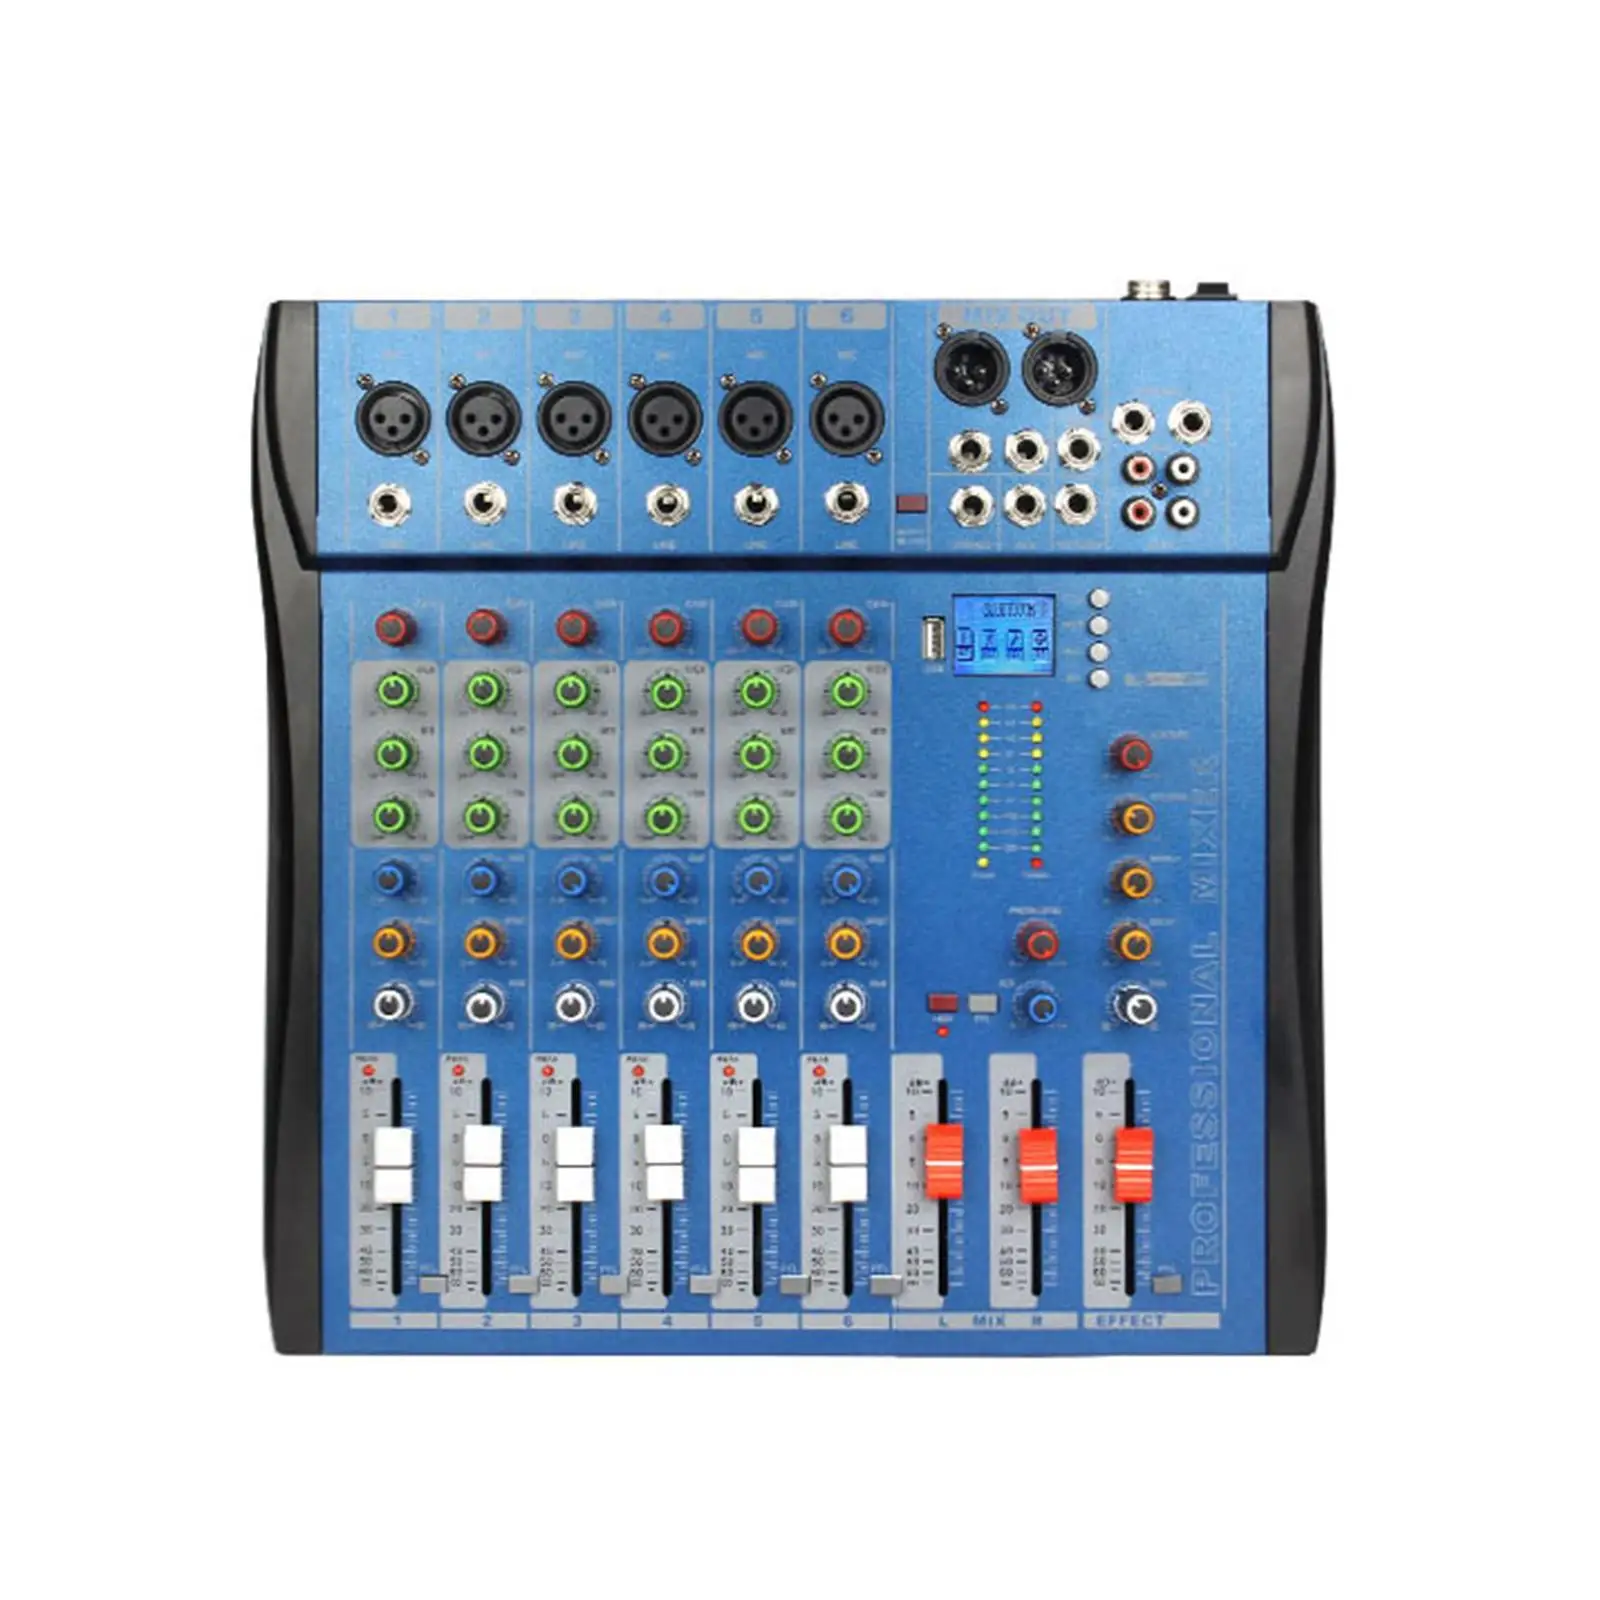 6 Channel Audio Mixer Sound Mixing Console US Adapter 35x34x3.7cm/13.8x13.4x1.5inch for Karaoke Durable Lightweight Professional